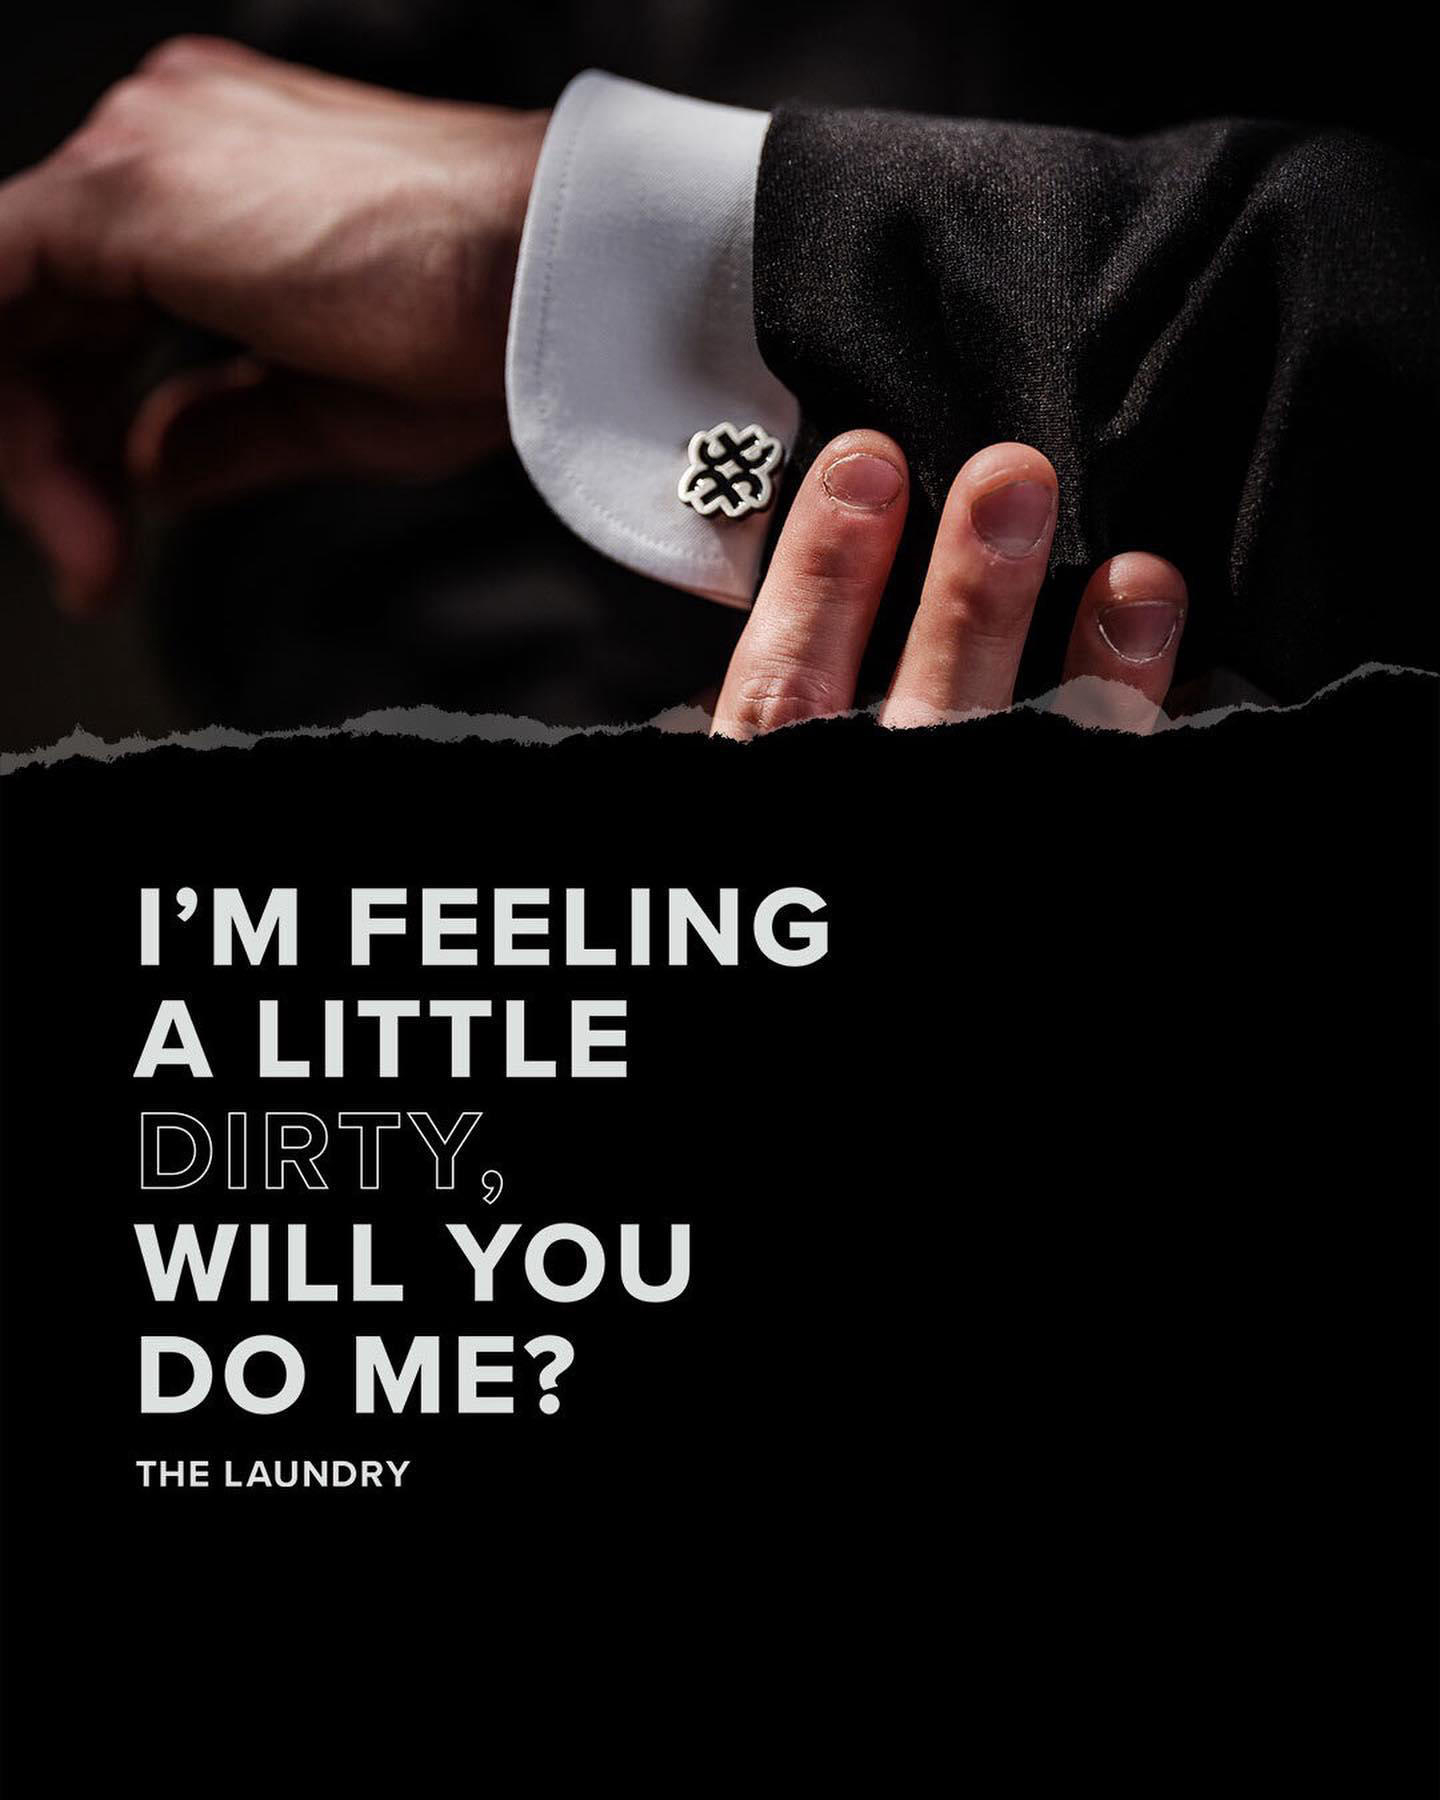 The Jane Antwerp - We’re looking for a laundry room attendant